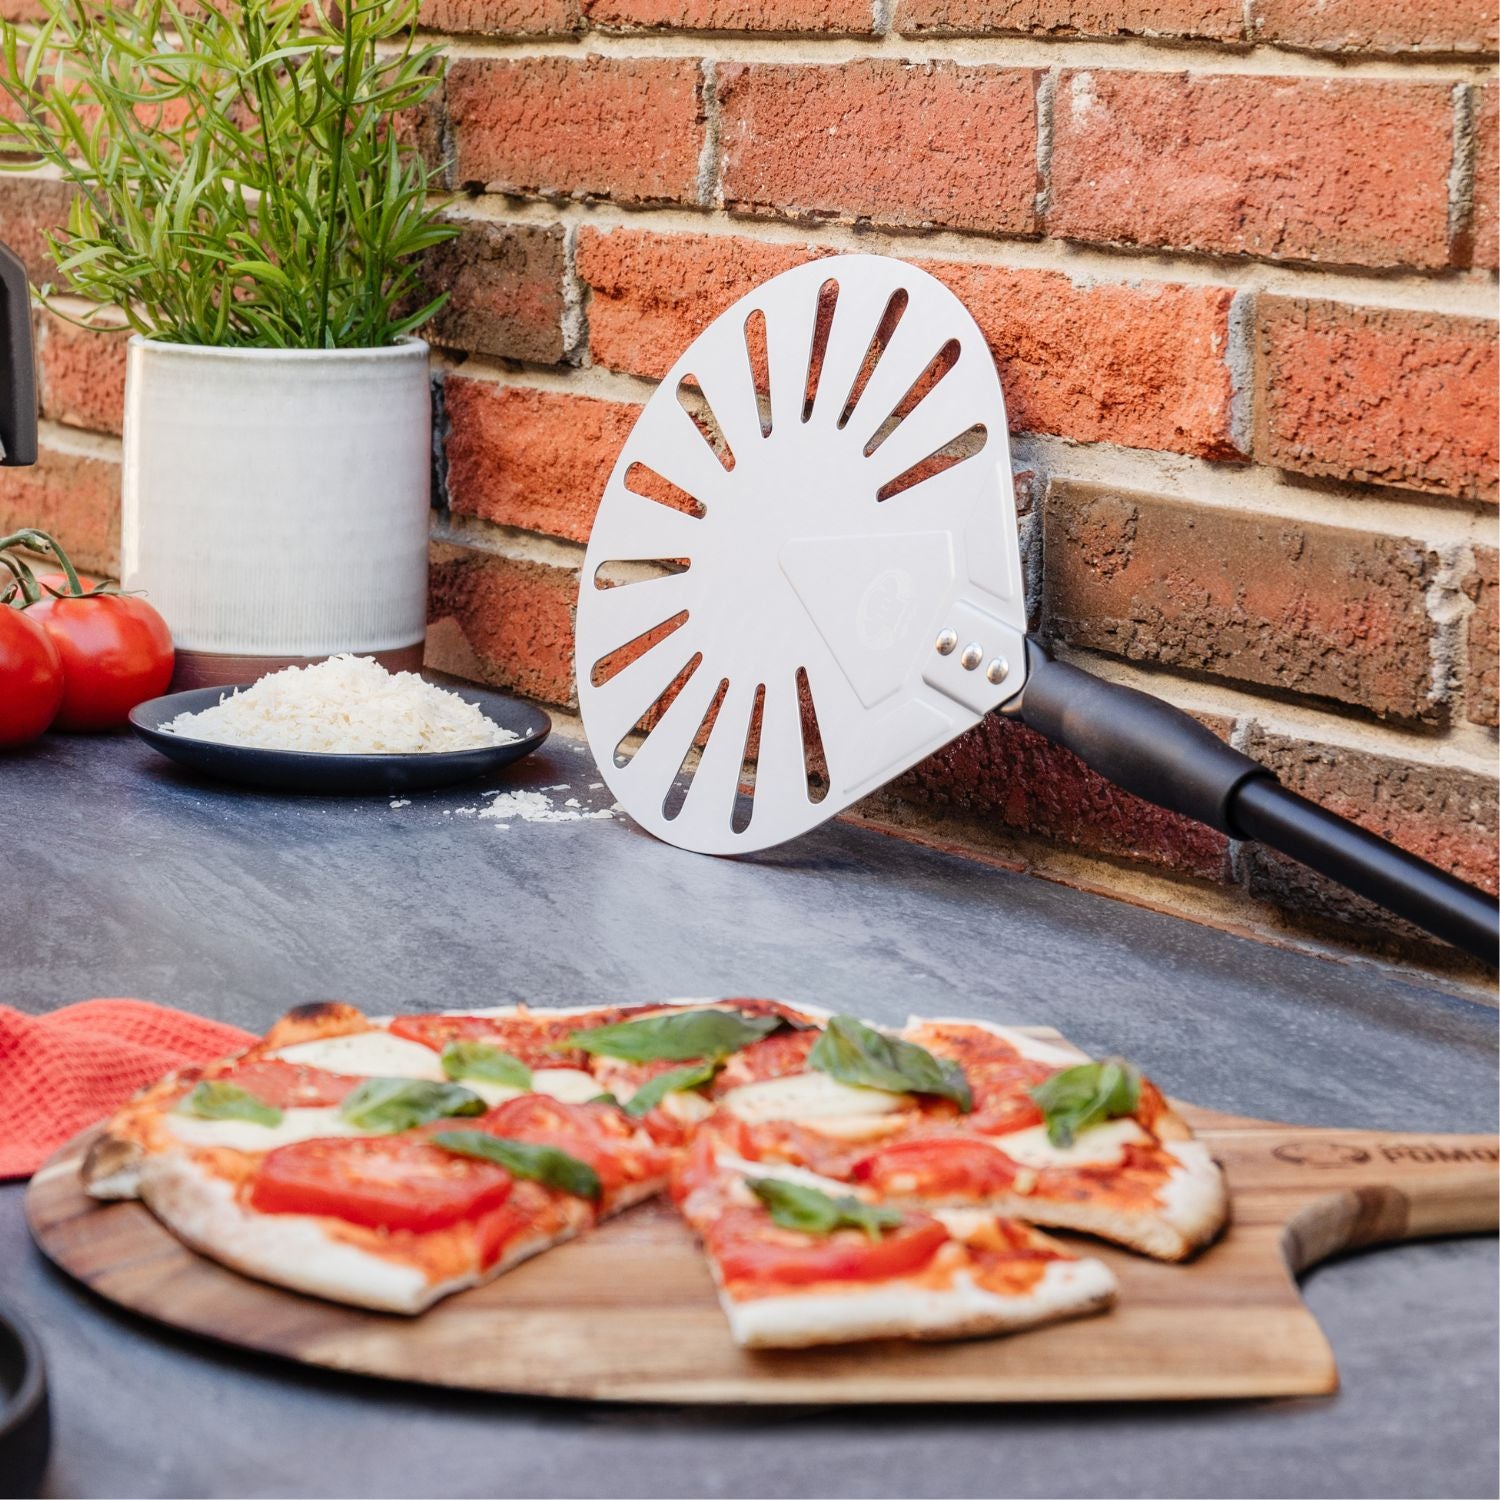 Chef Pomodoro Pizza Baking Set with 3 Pizza Pans and Pizza Rack, (11-Inch  Pans), Non-stick Perforated Pizza Trays for Oven, Grill, Pizza Pan with